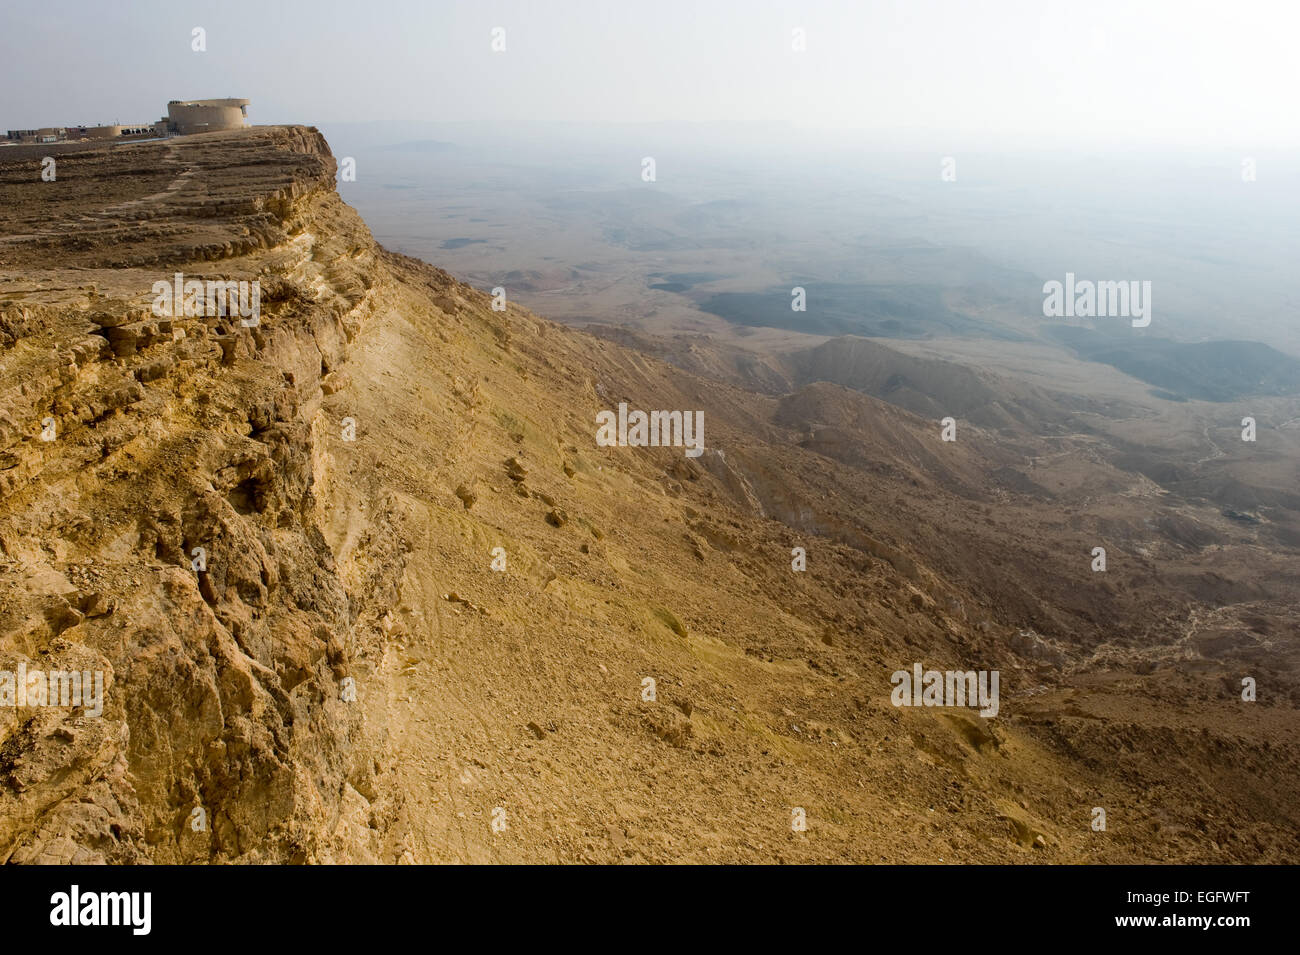 'Ramon observation point' on the edge of the Makhtesh ramon crater in the negev desert Stock Photo